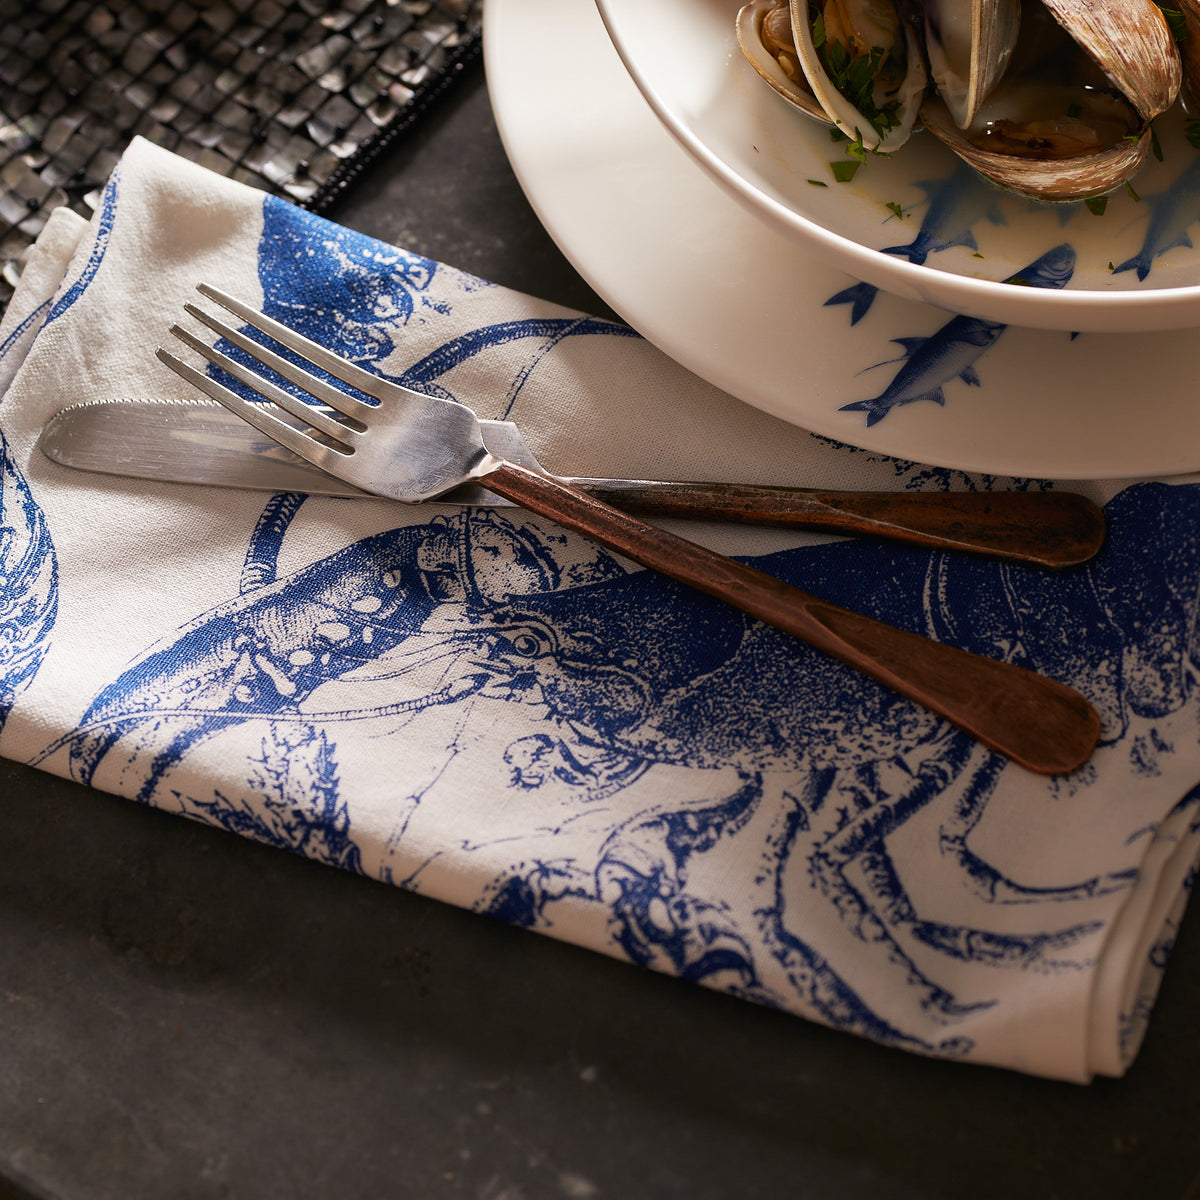 A Blue and White 100% cotton lobster dinner napkin from Caskata folded under a knife and fork.